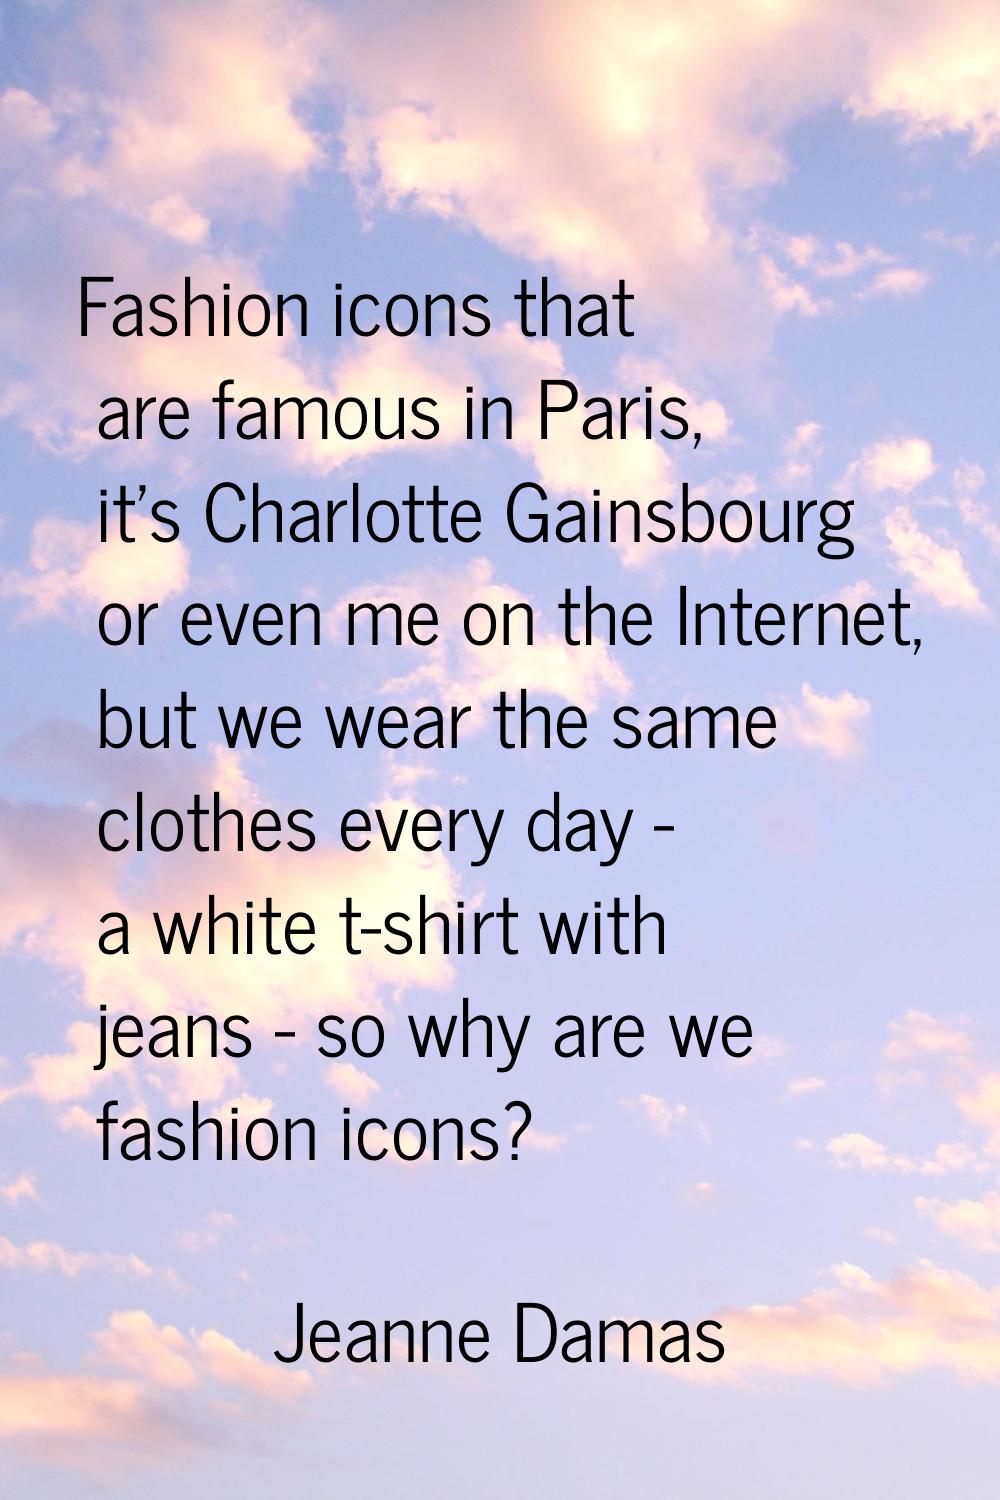 Fashion icons that are famous in Paris, it's Charlotte Gainsbourg or even me on the Internet, but w